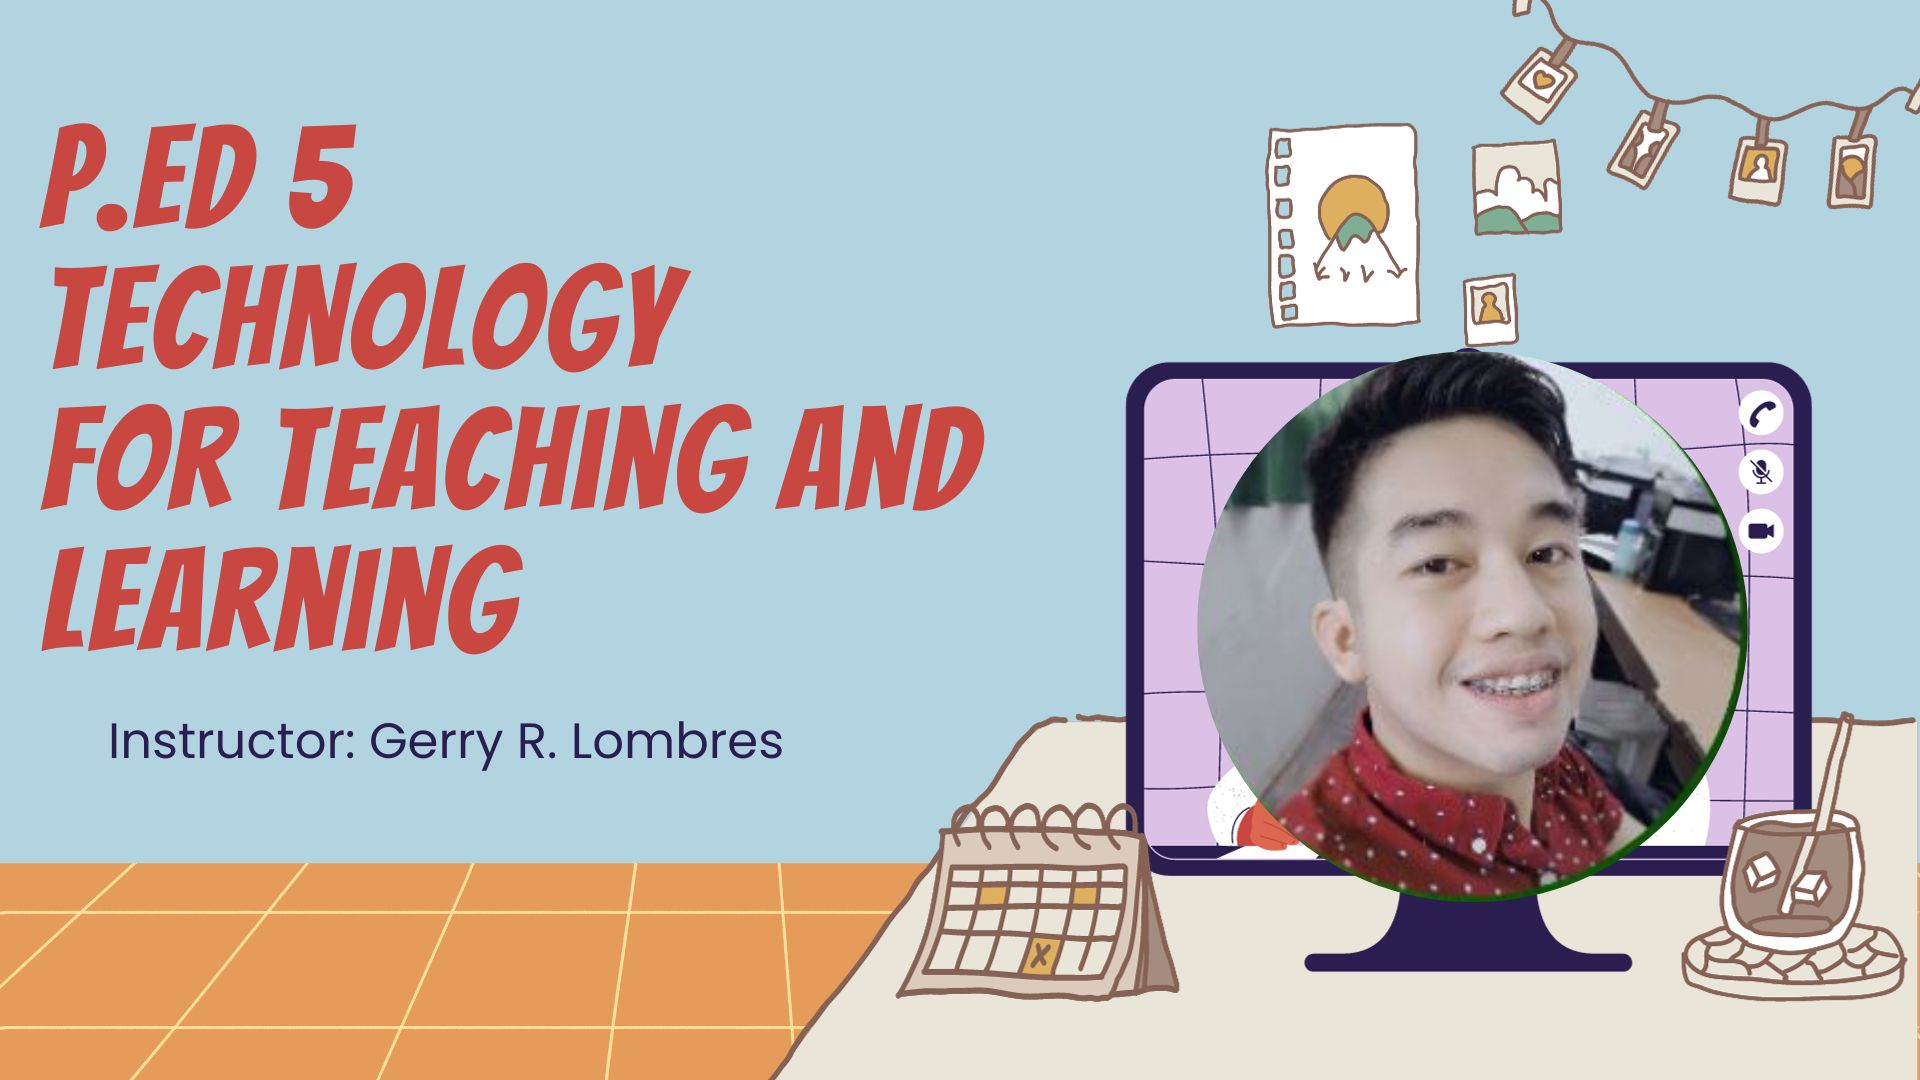 P.ED 5 - TECHNOLOGY FOR TEACHING AND LEARNING 1 